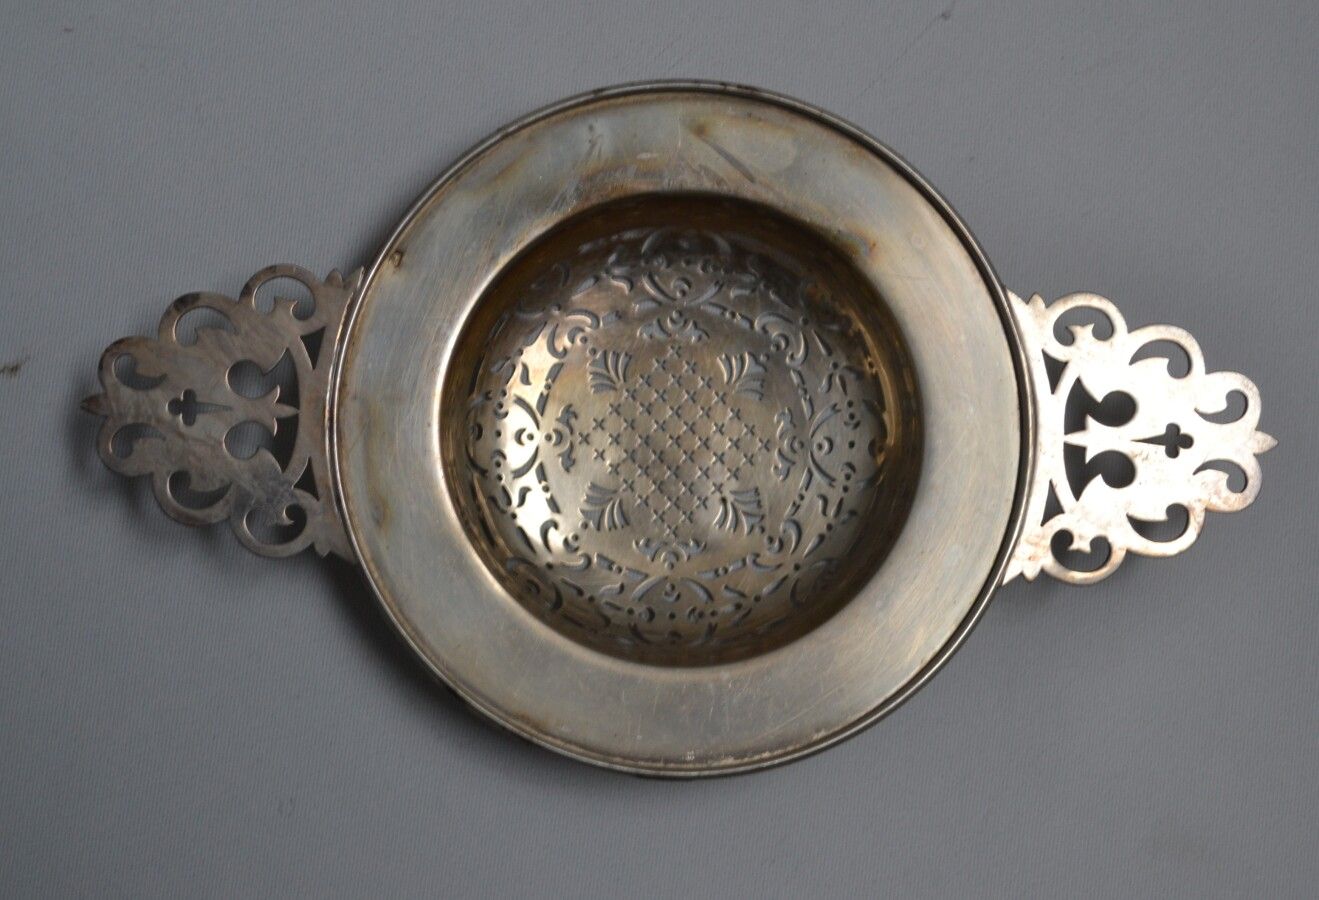 Null silver pass-through, with ears

English work, hallmarked with a weevil

L.:&hellip;